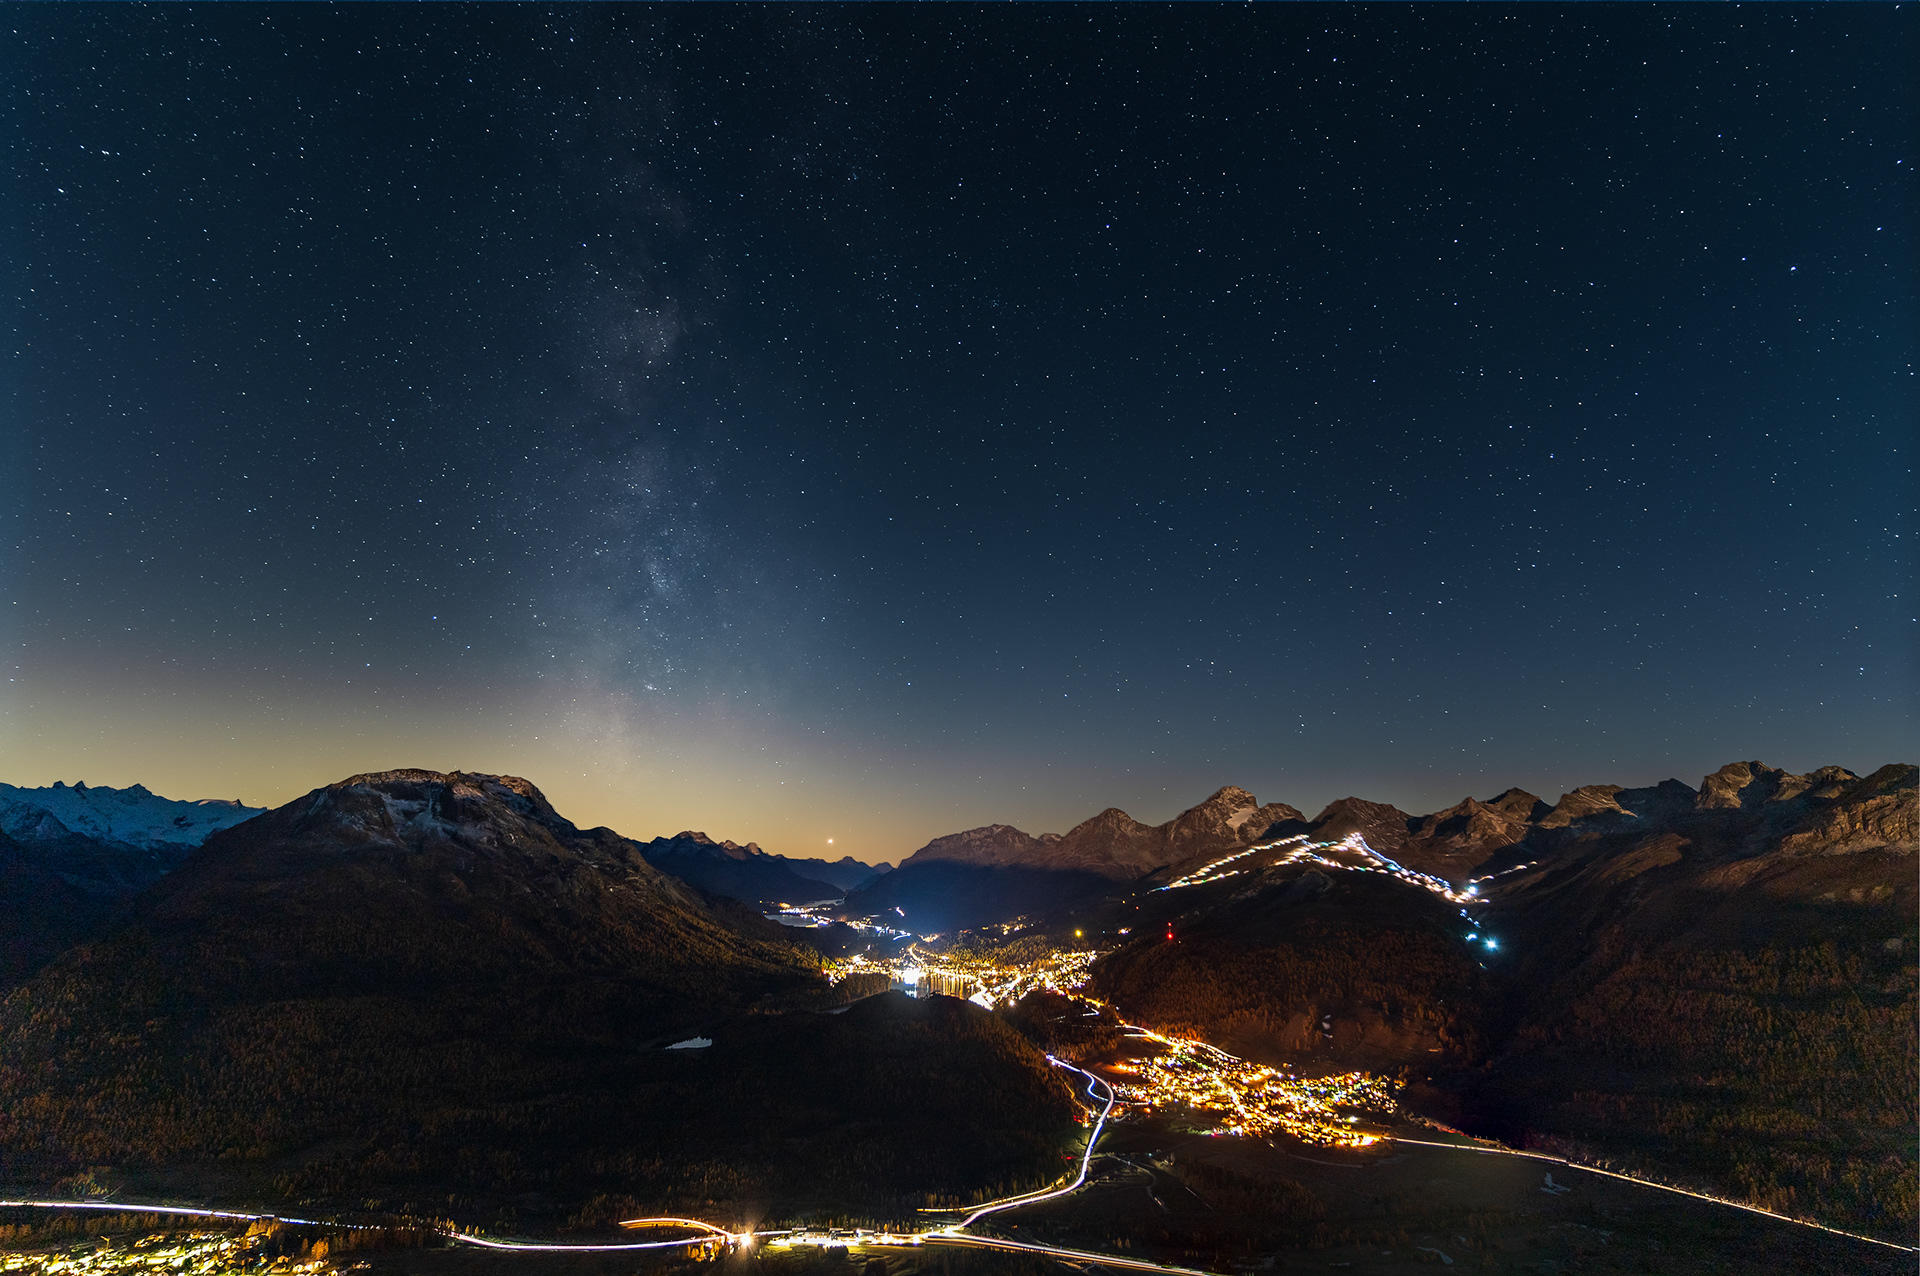 General 1920x1276 photography nature mountains night nightscape landscape city lights stars long exposure